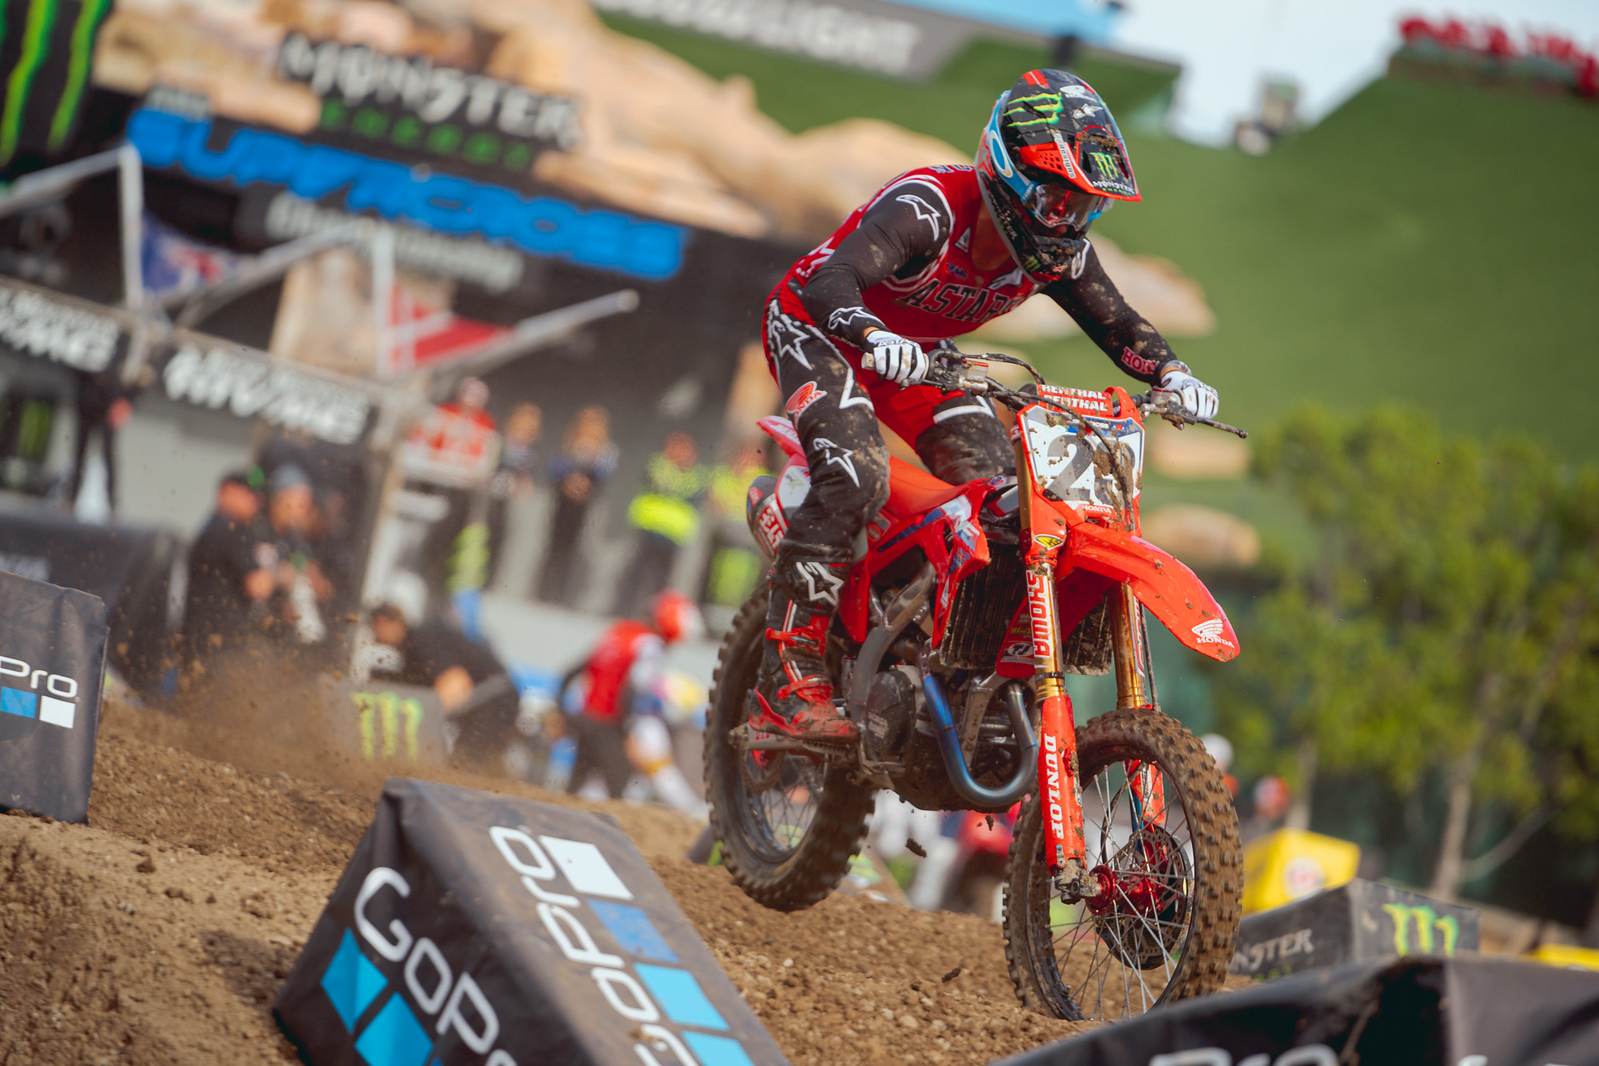 2023 Anaheim One Supercross Qualifying Report and Times